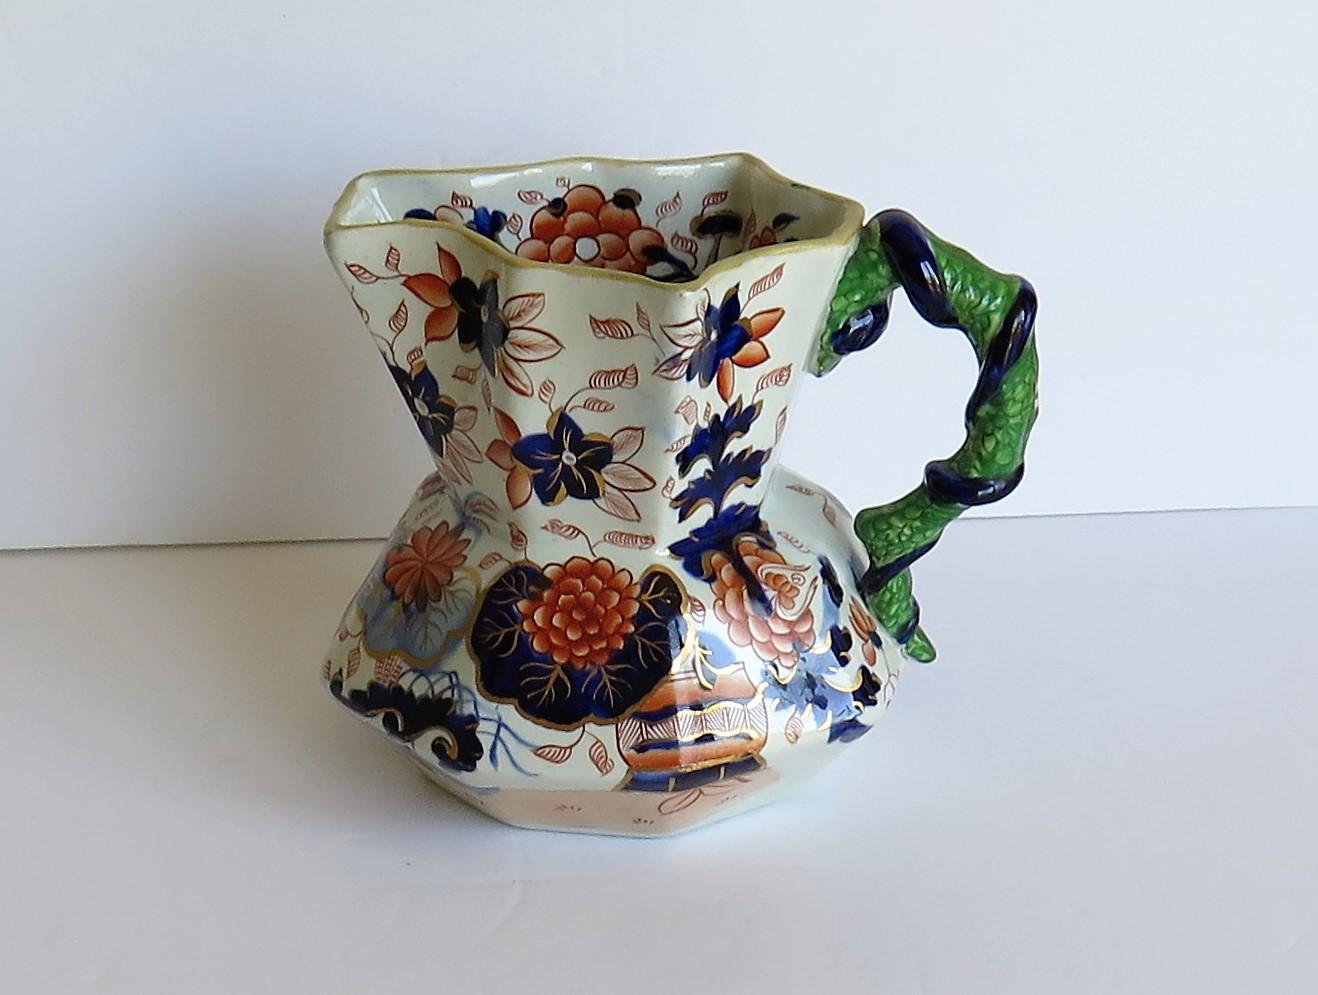 Chinoiserie Early Ironstone Jug or Pitcher with Entwined Snake Handle Hand Painted, Ca. 1820